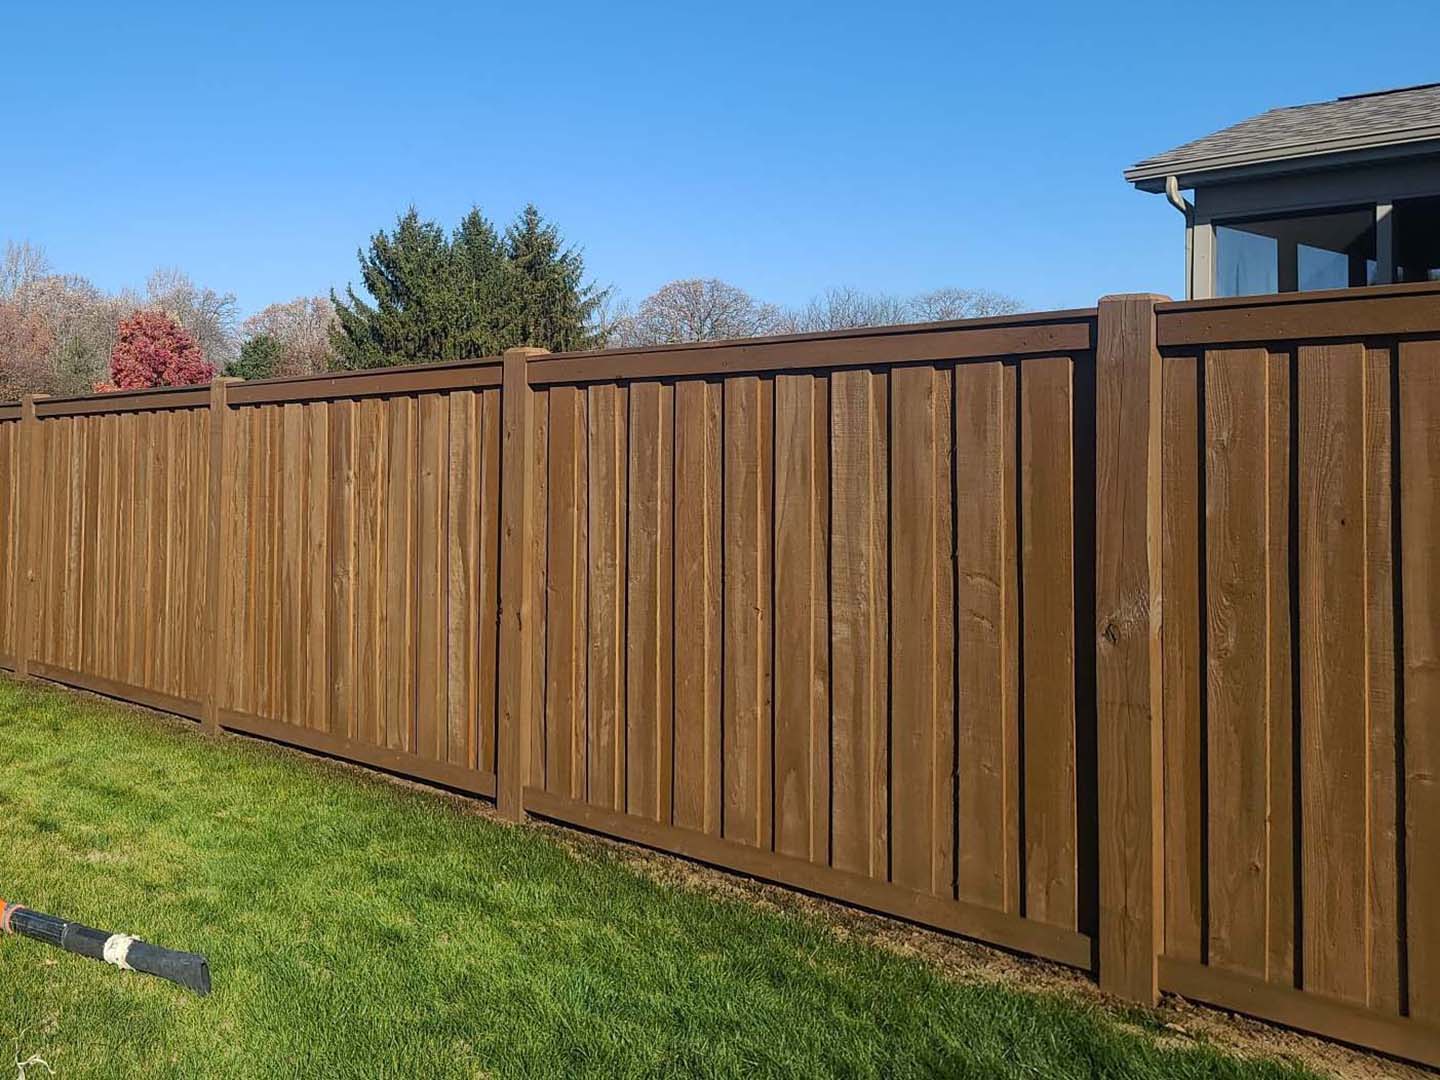 Fence stain and pre-stain contractor in Kokomo Indiana and the surrounding area